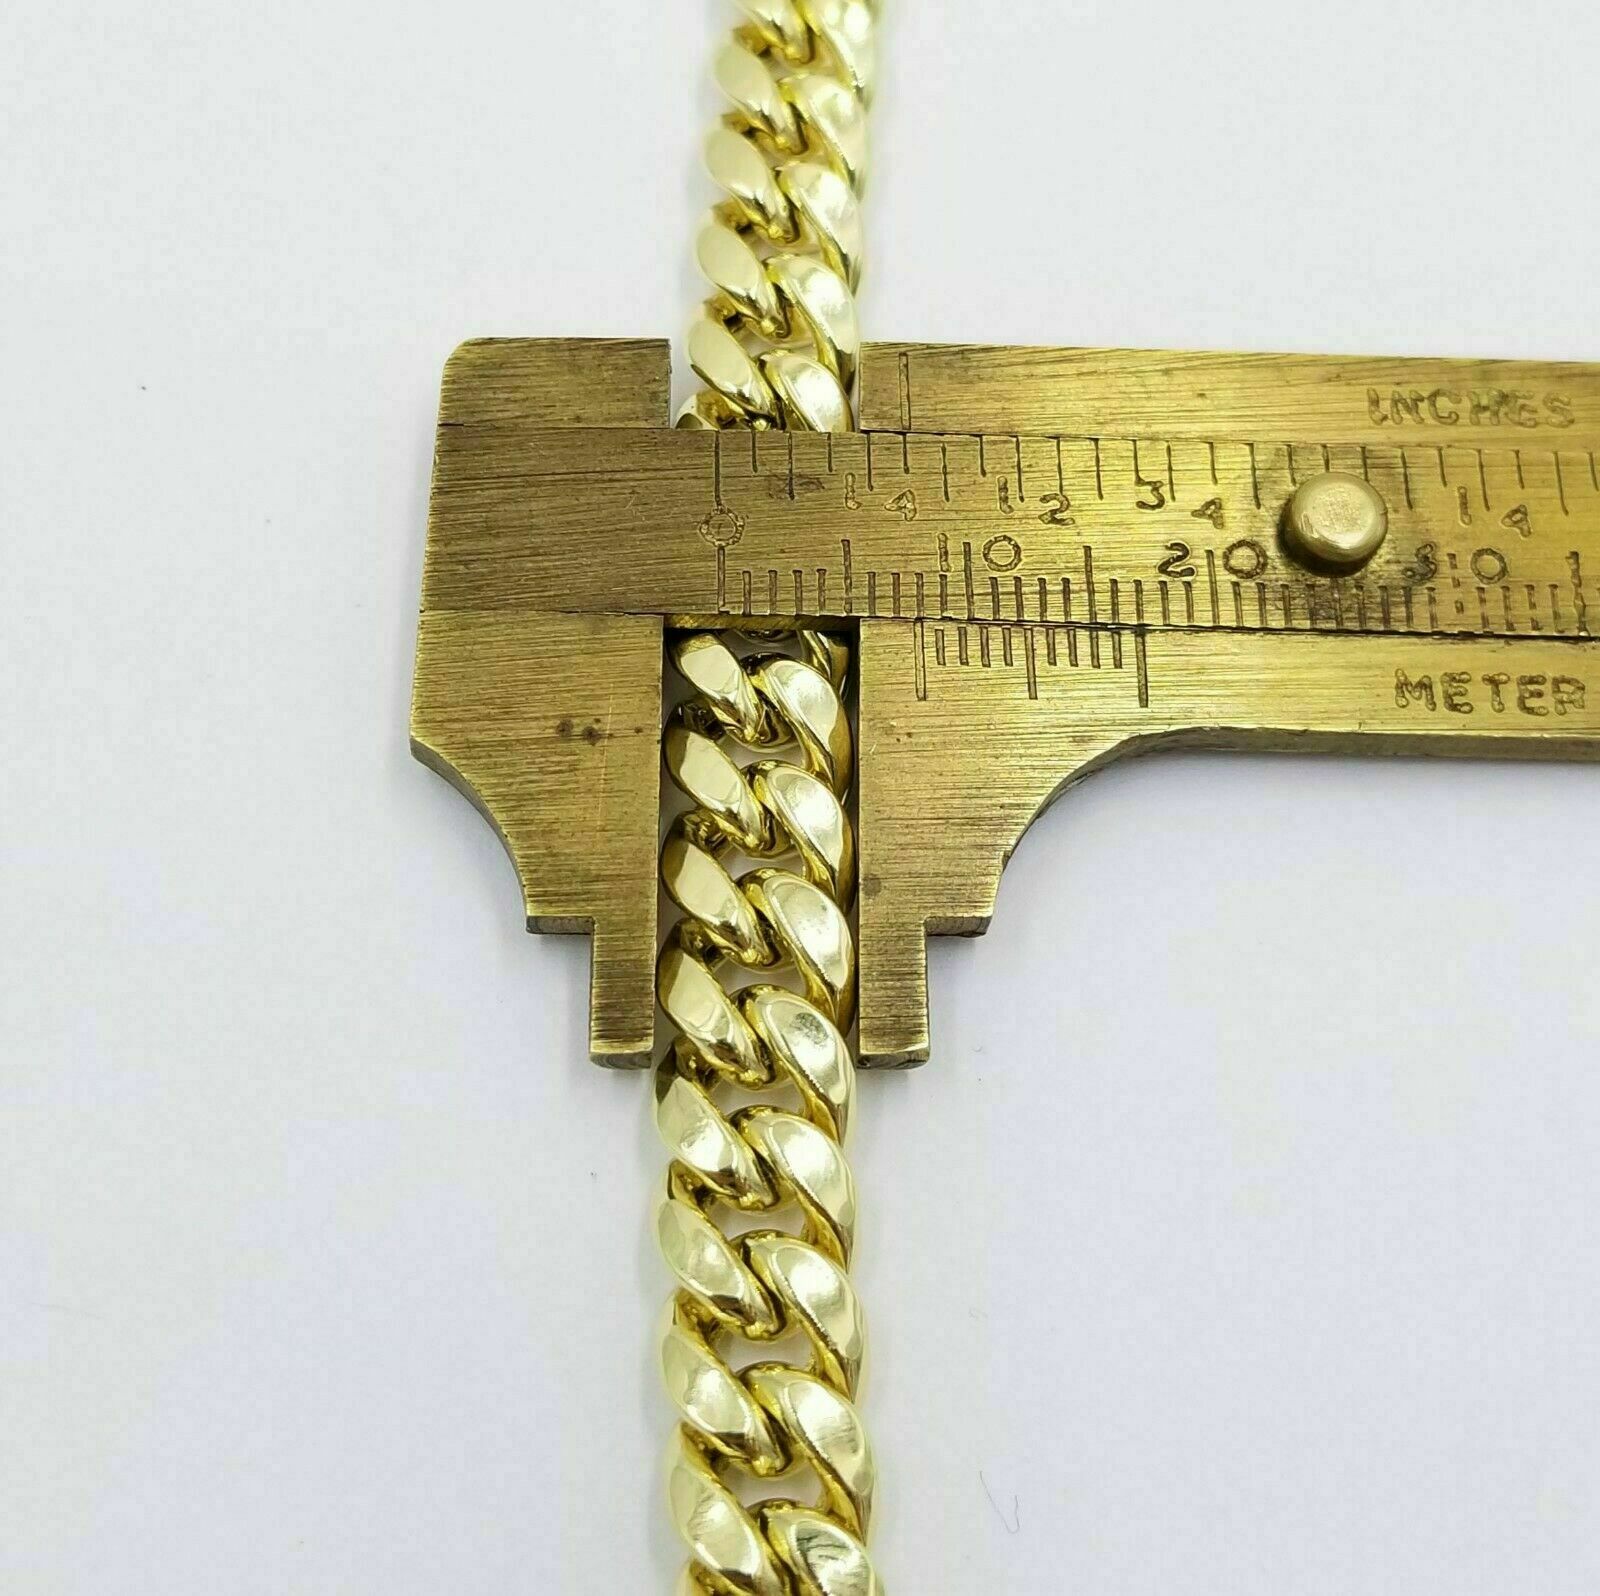 14k Gold Miami Cuban link chain 8mm 28" Inch Box Clasp REAL 14kt Yellow Gold